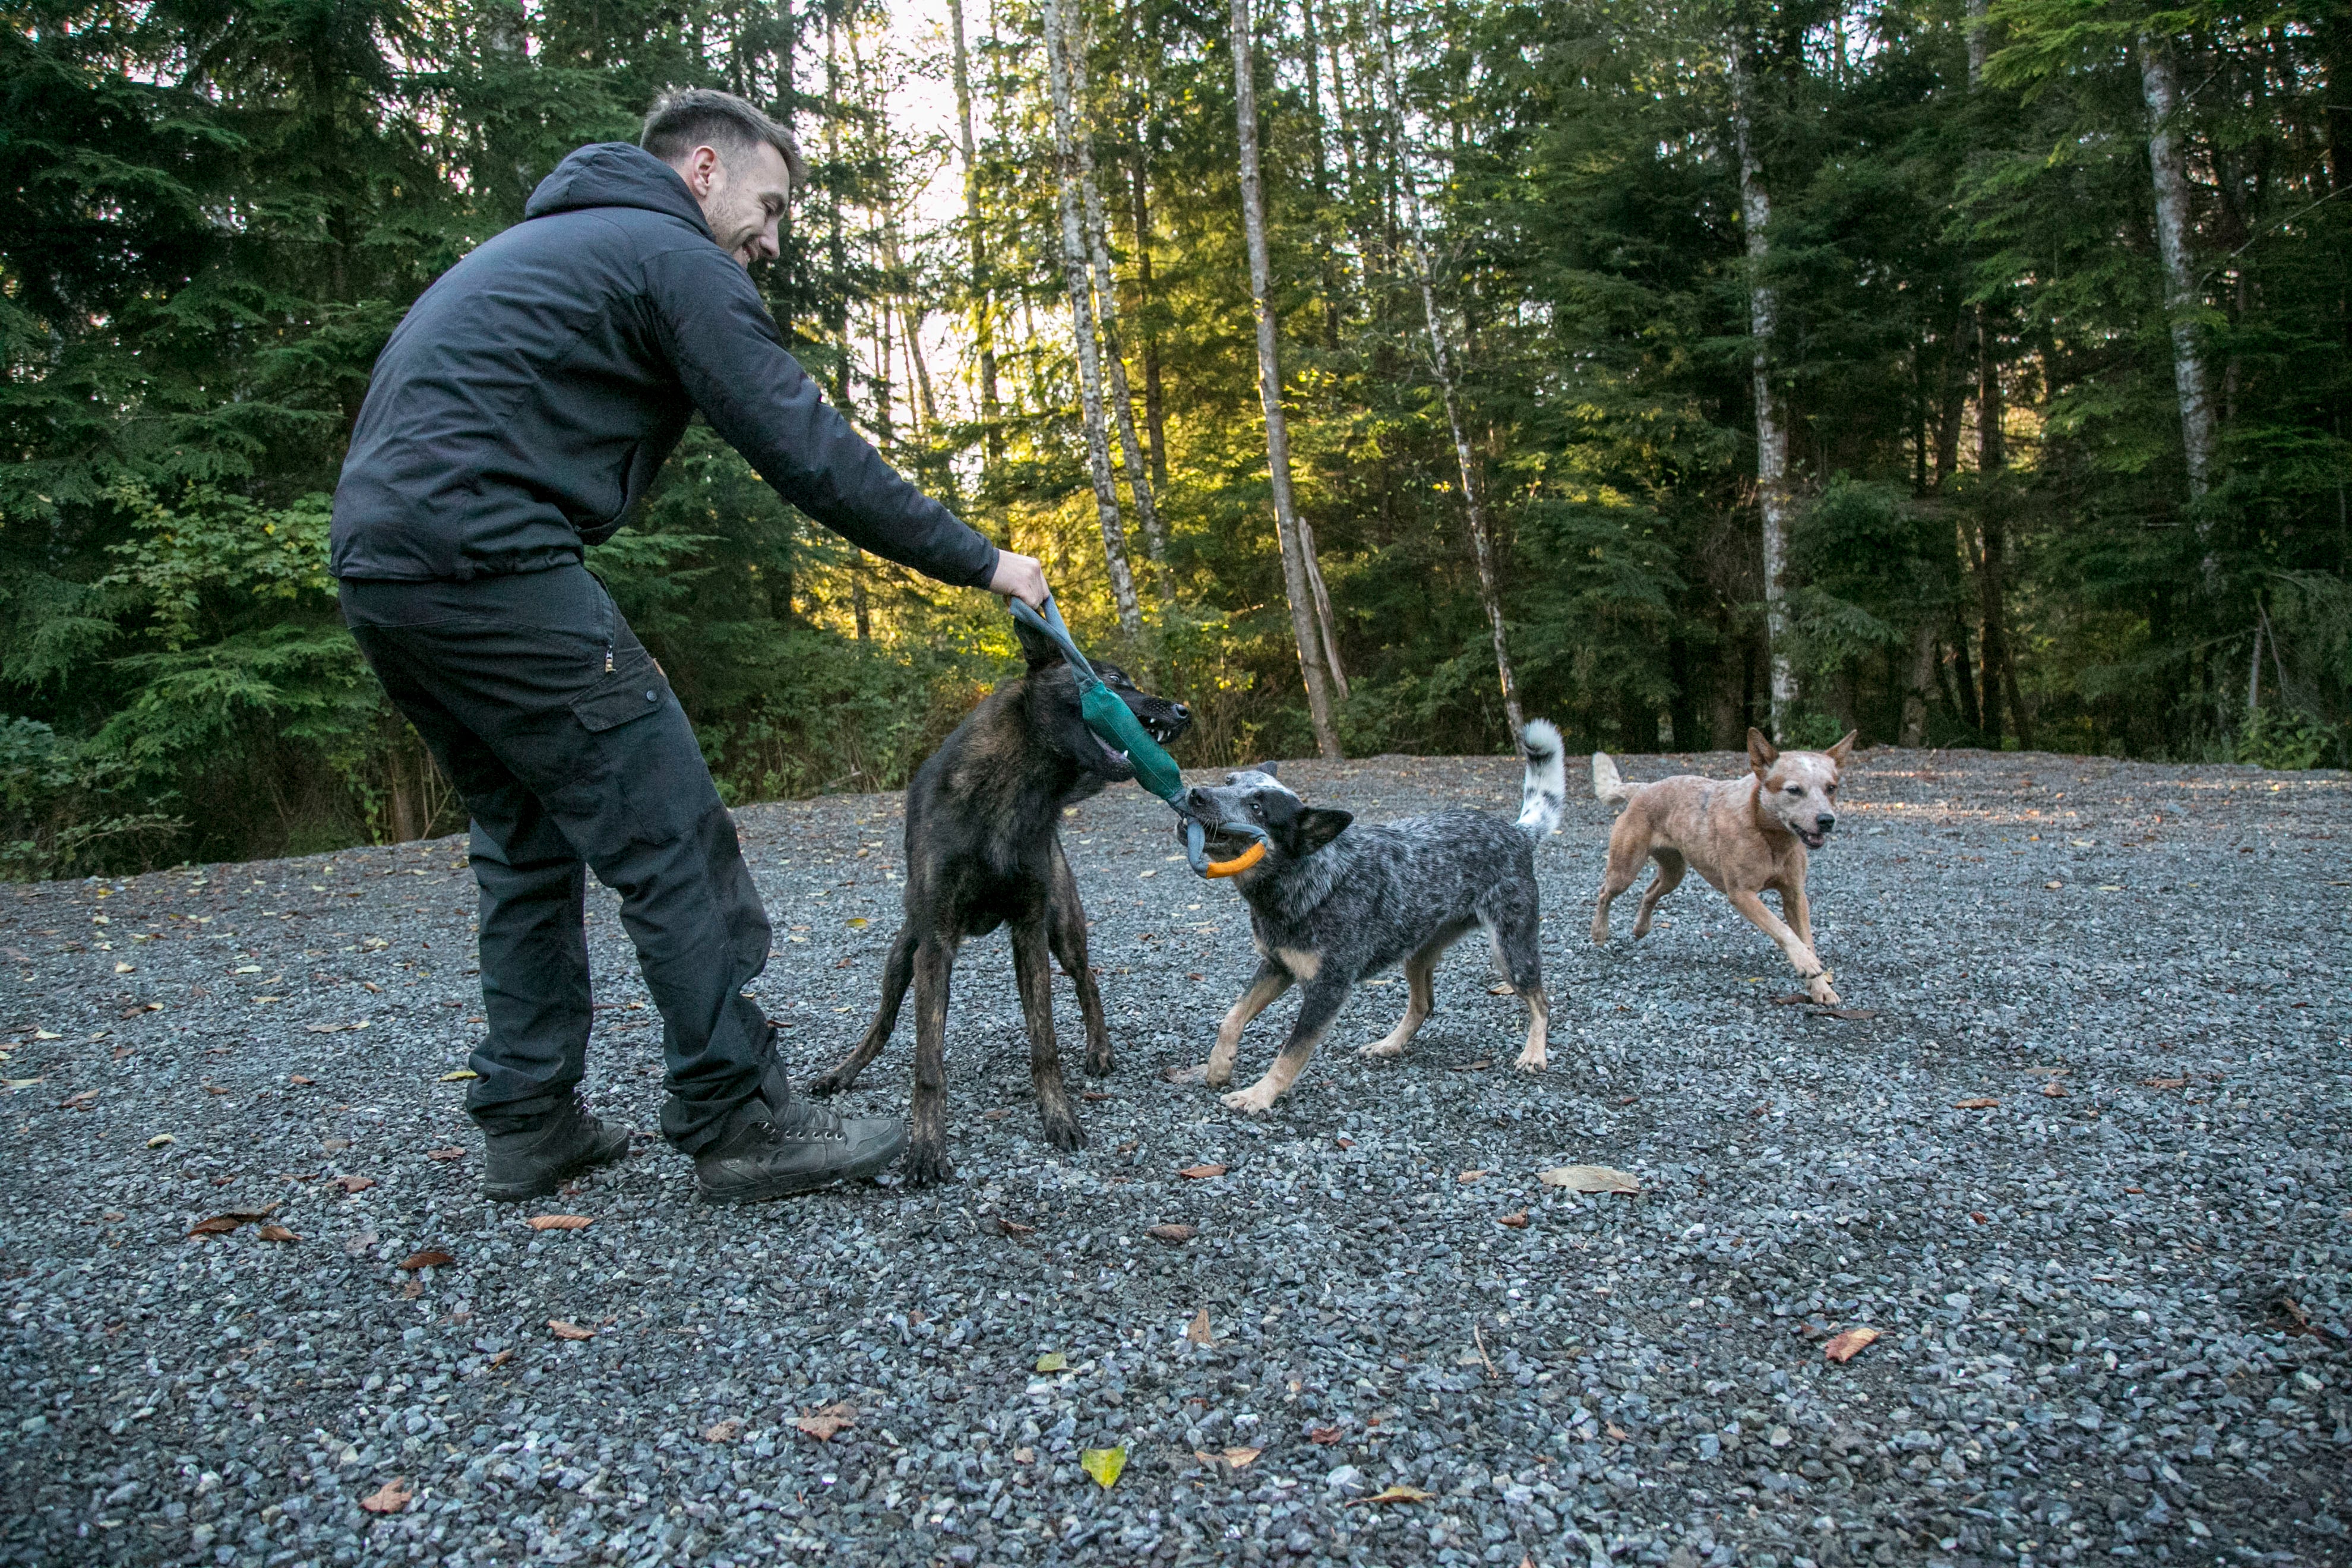 Man and three dogs play tug with pacific loop toy.